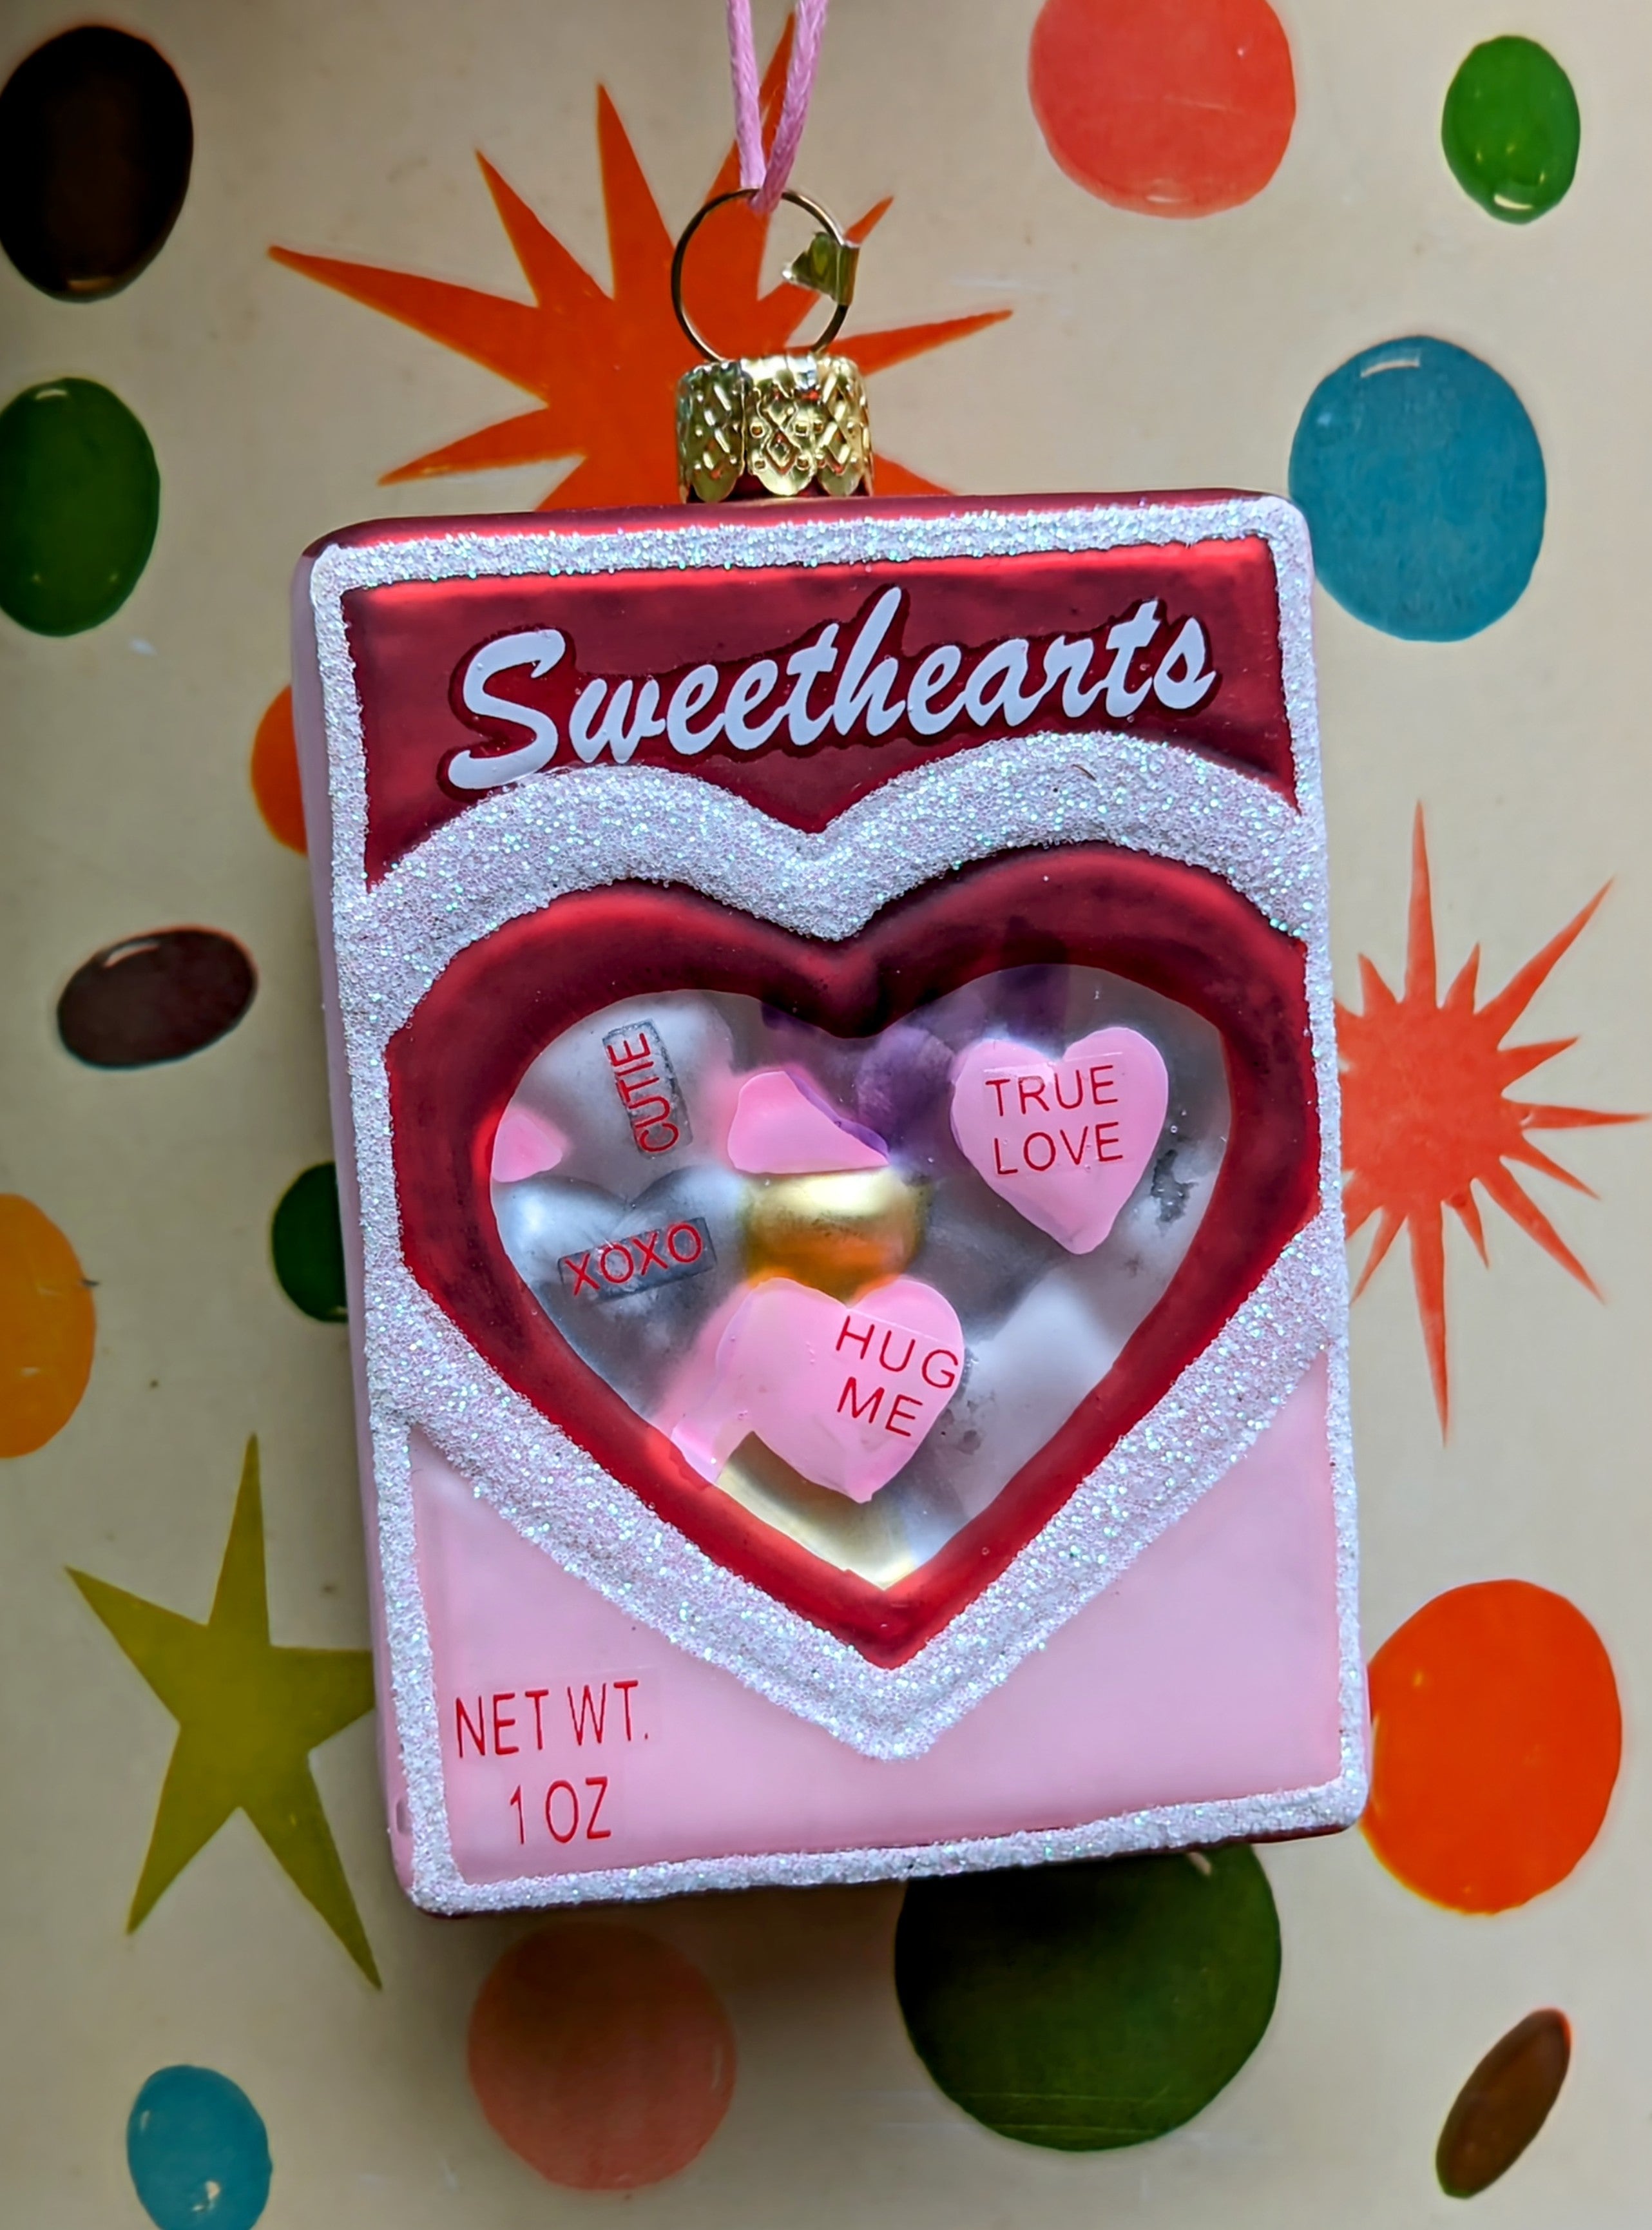 Sweethearts for your sweetie